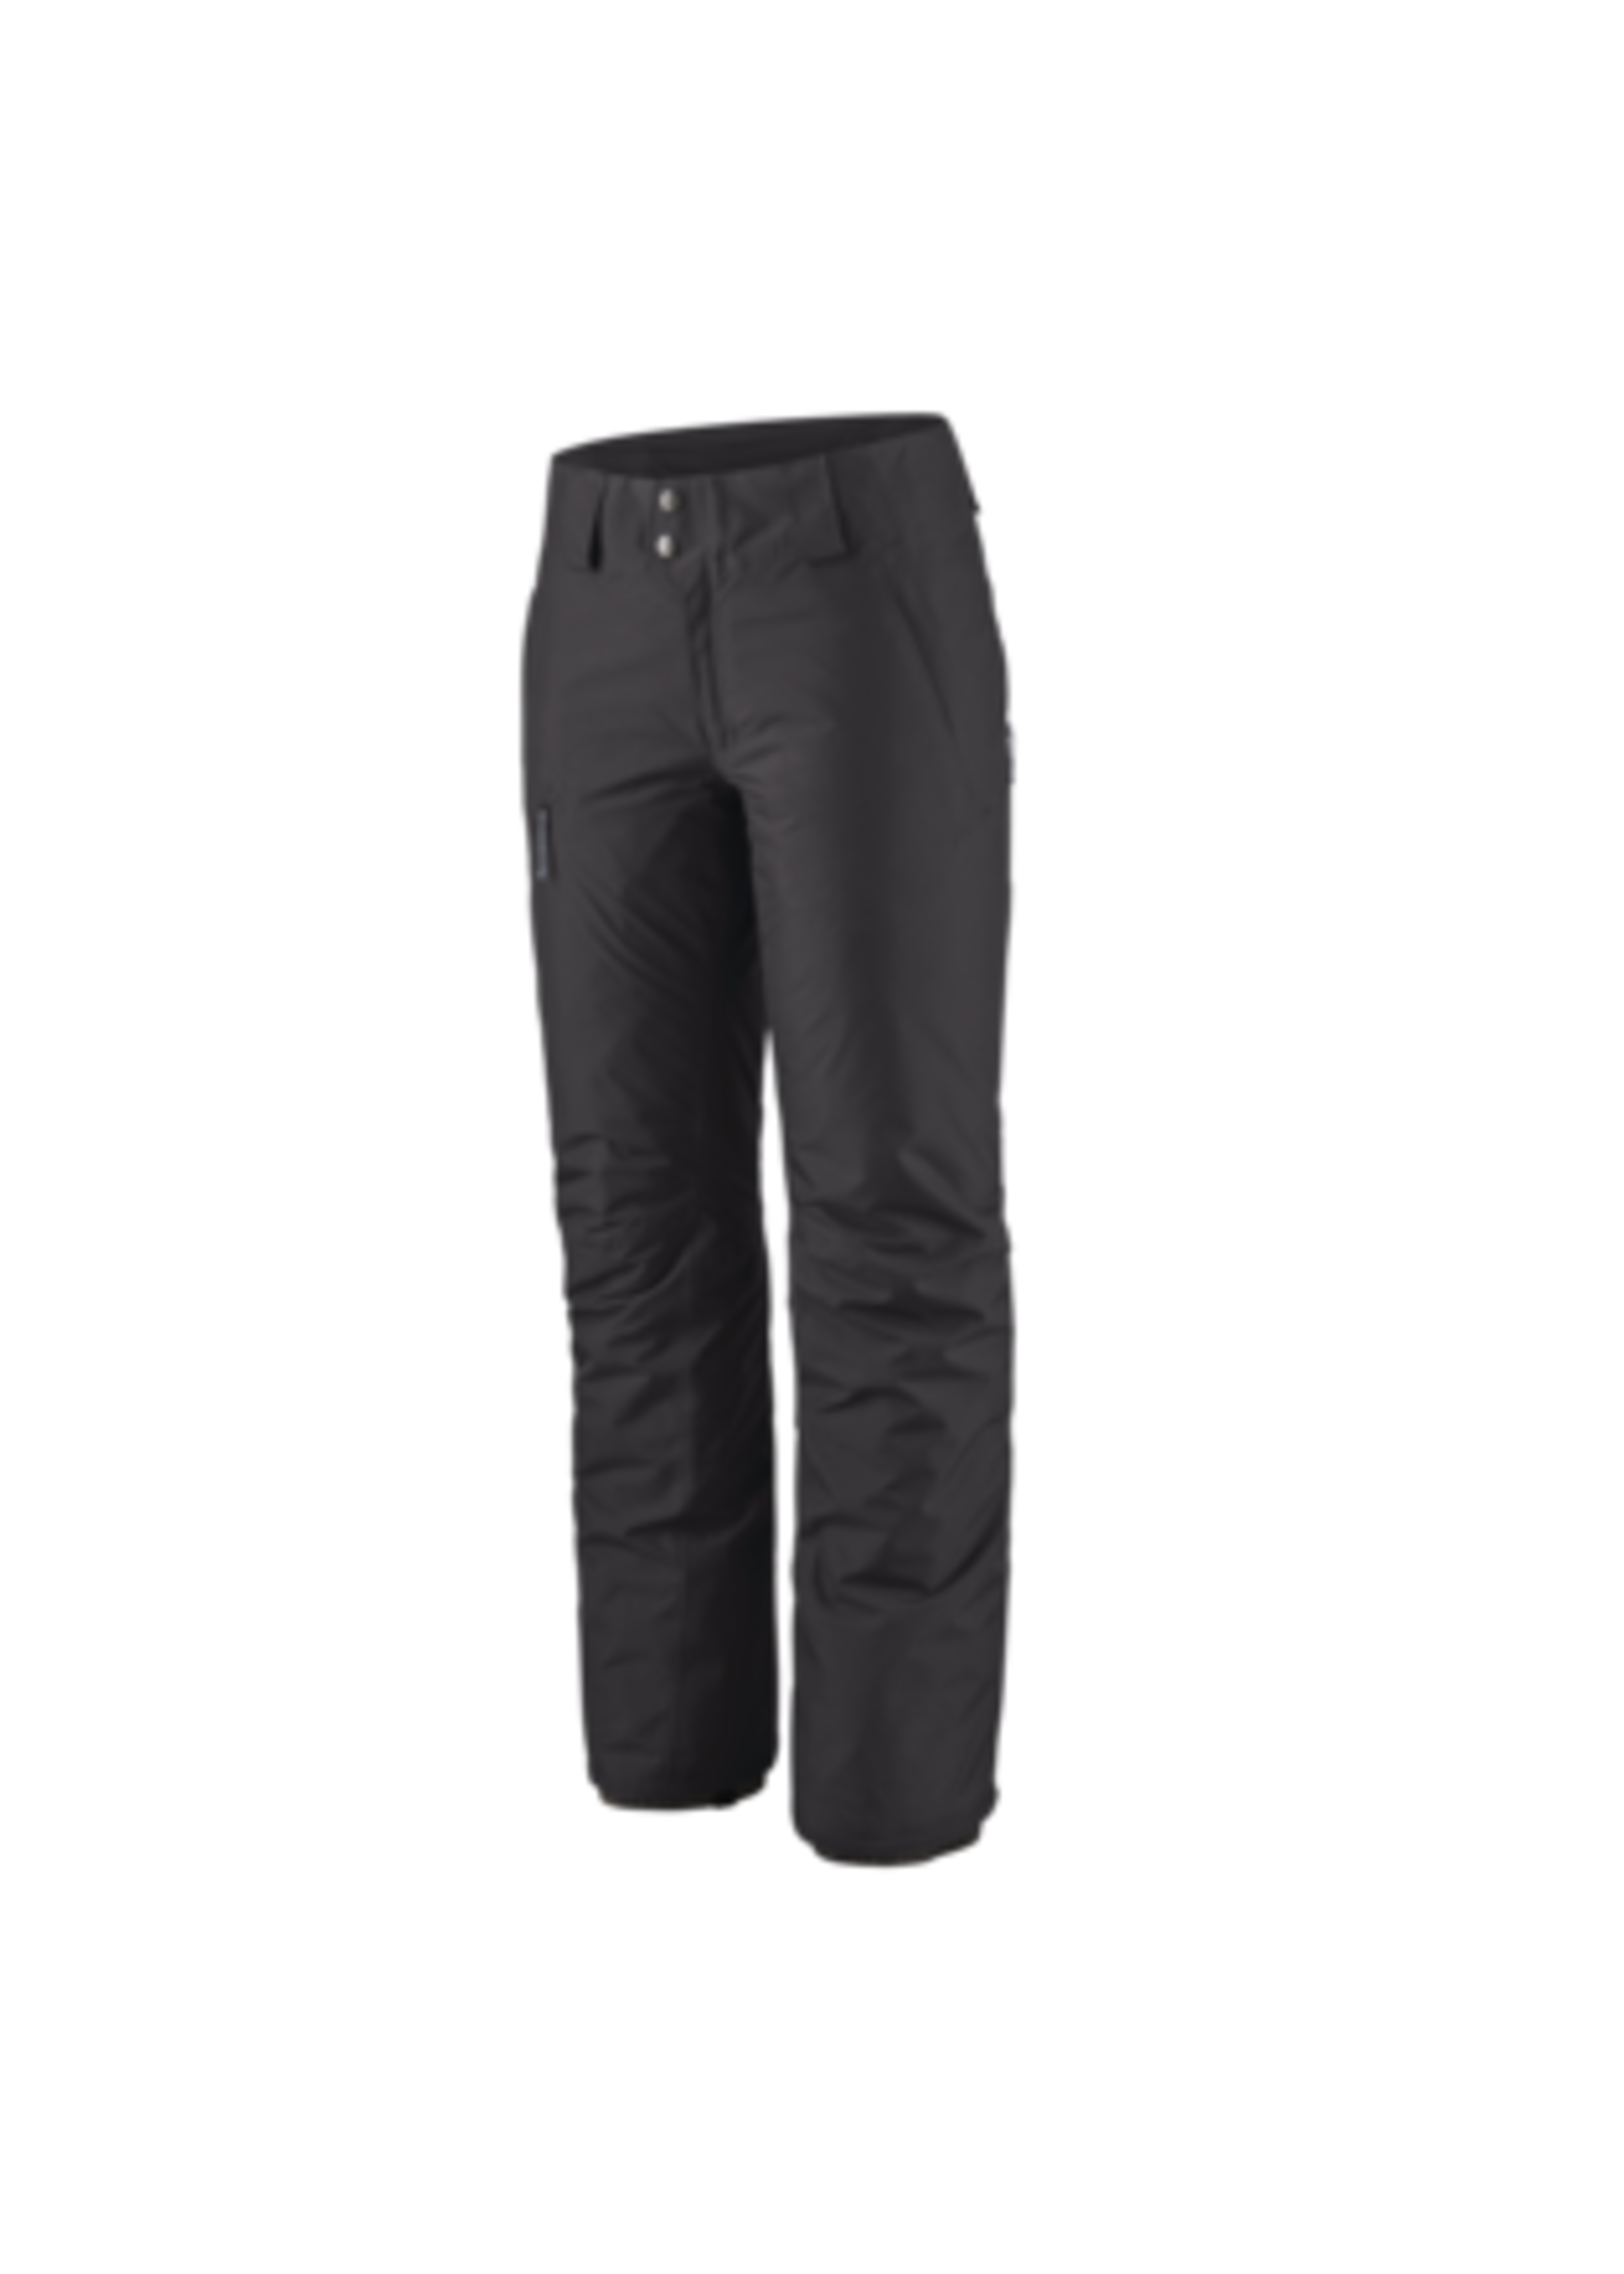 Patagonia W's Insulated Powder Town Pants - Short - Black